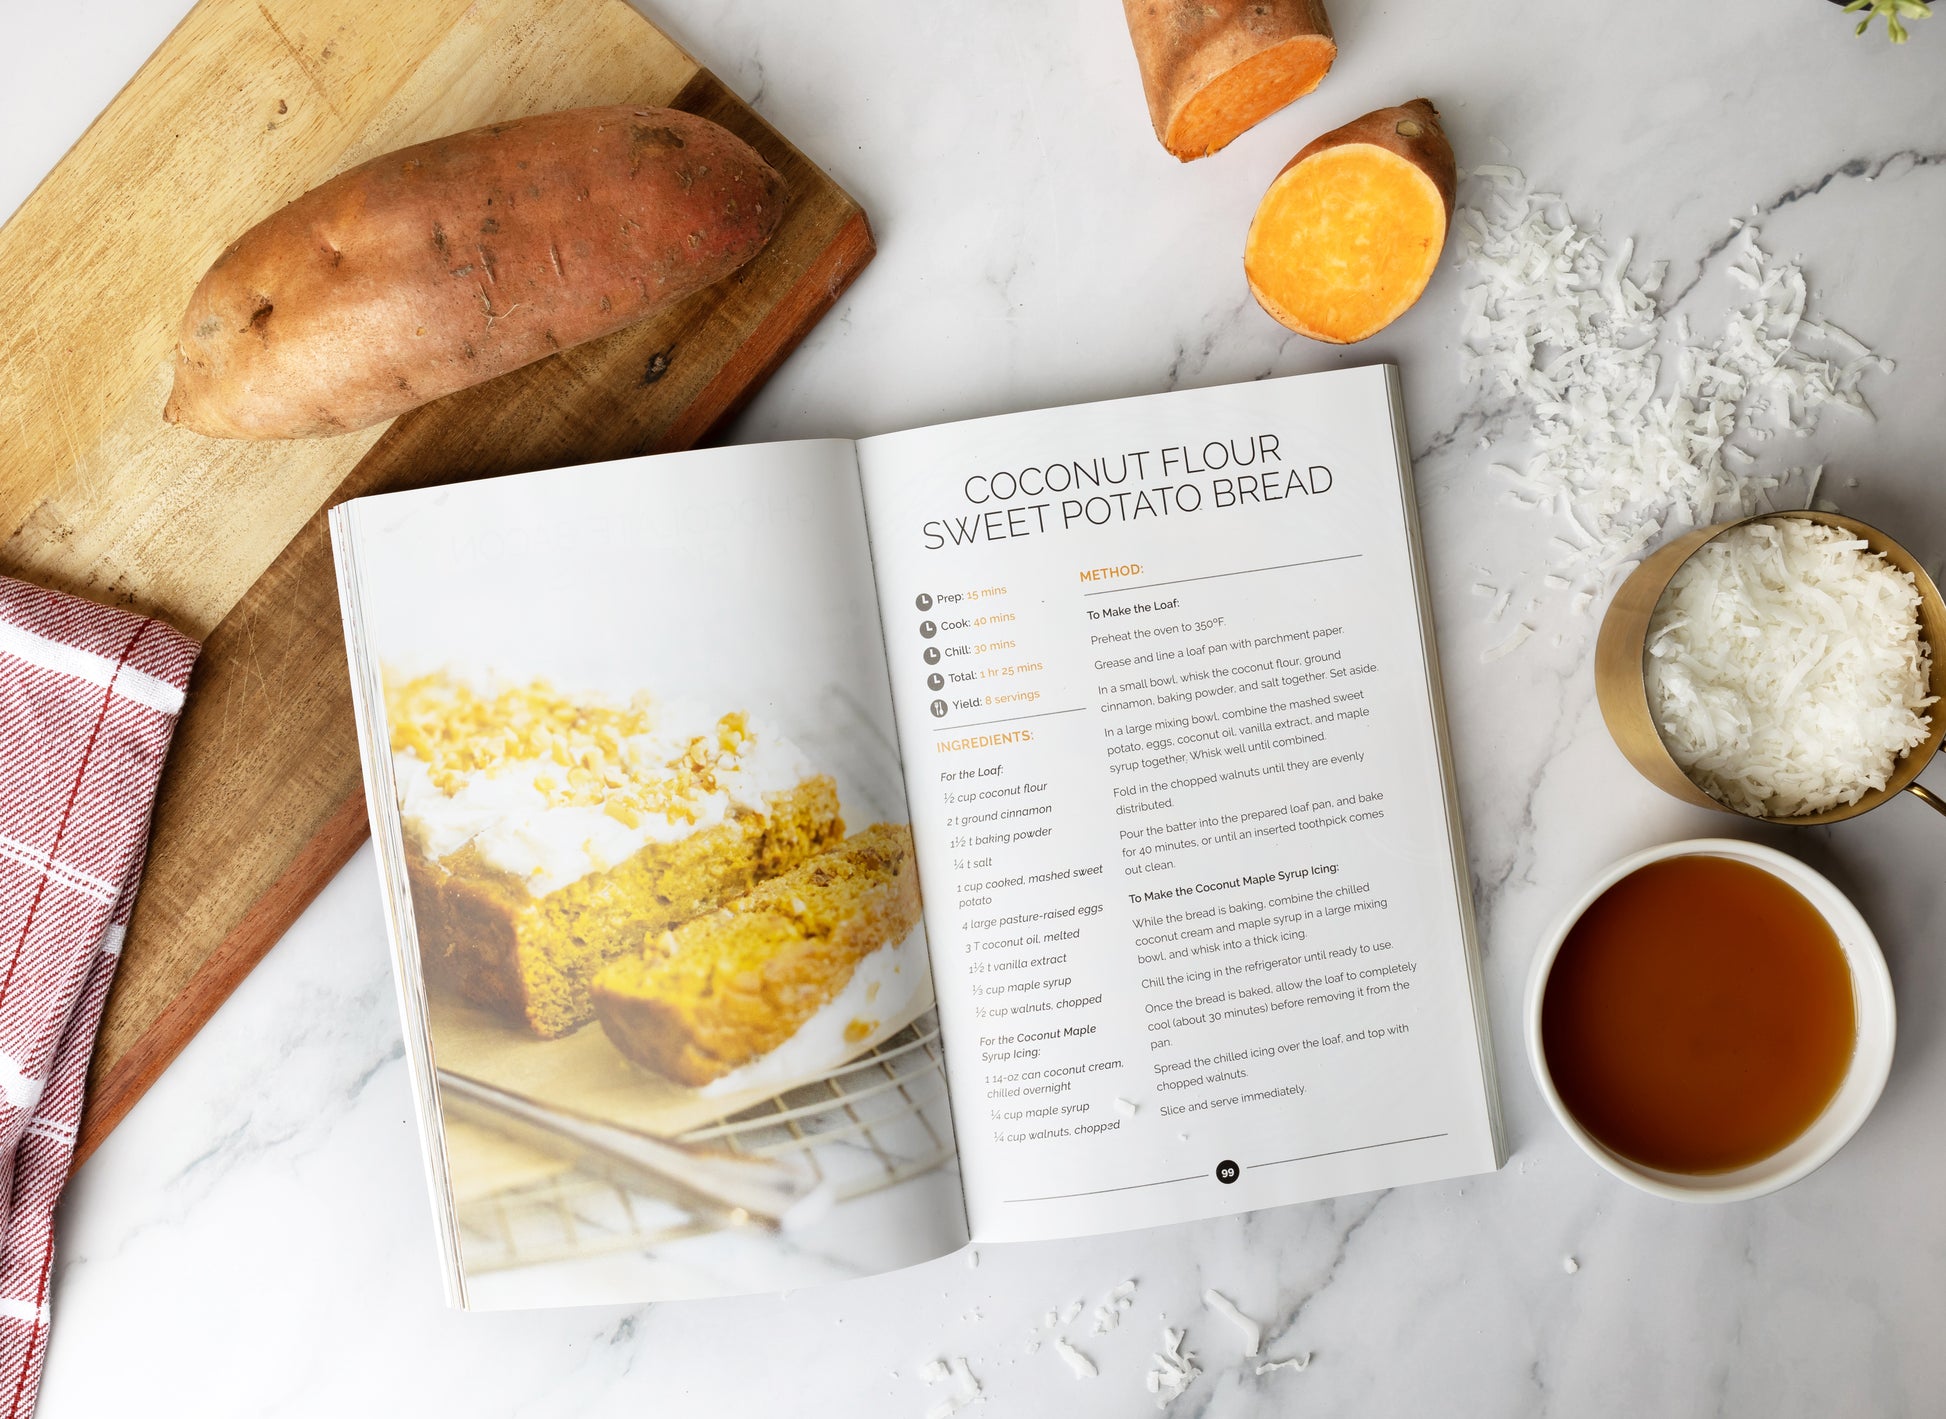  An opened Paleo Snacks Cookbook placed on a cutting board and a marble surface, surrounded by a bowl of honey and shredded coconut.